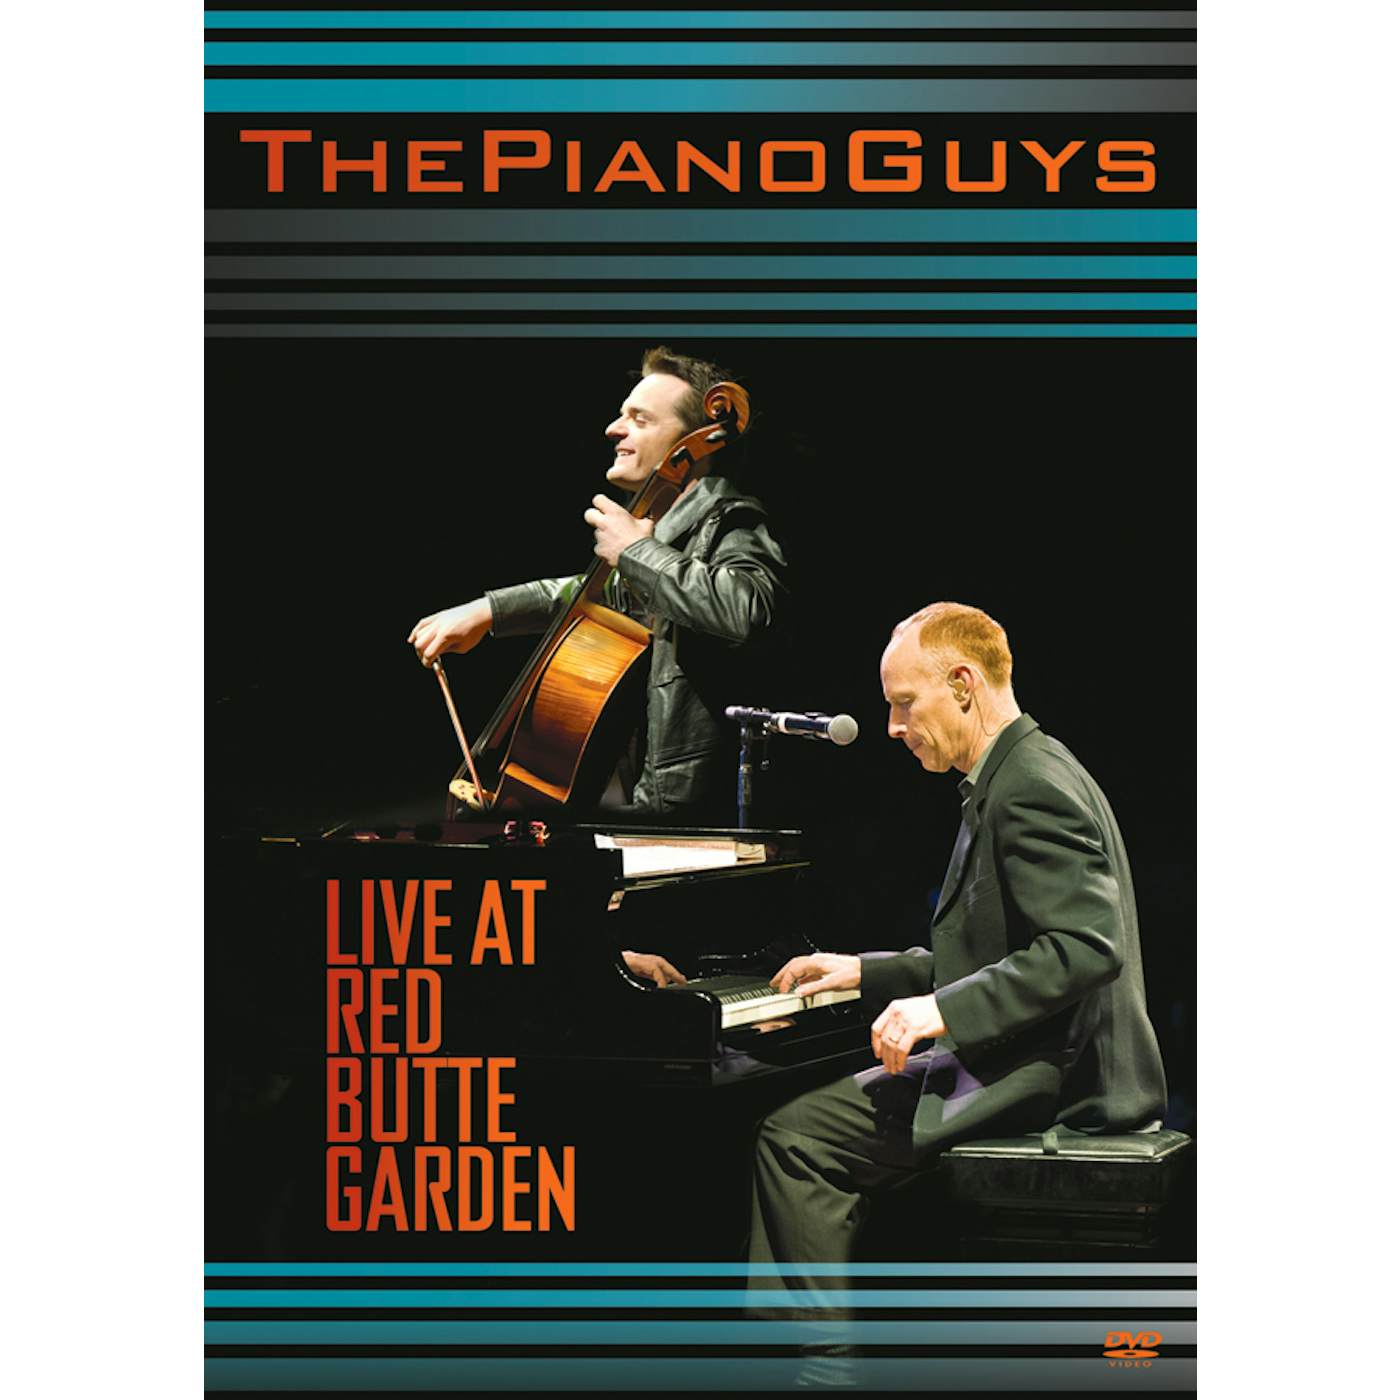 The Piano Guys: LIVE AT RED BUTTE GARDEN DVD